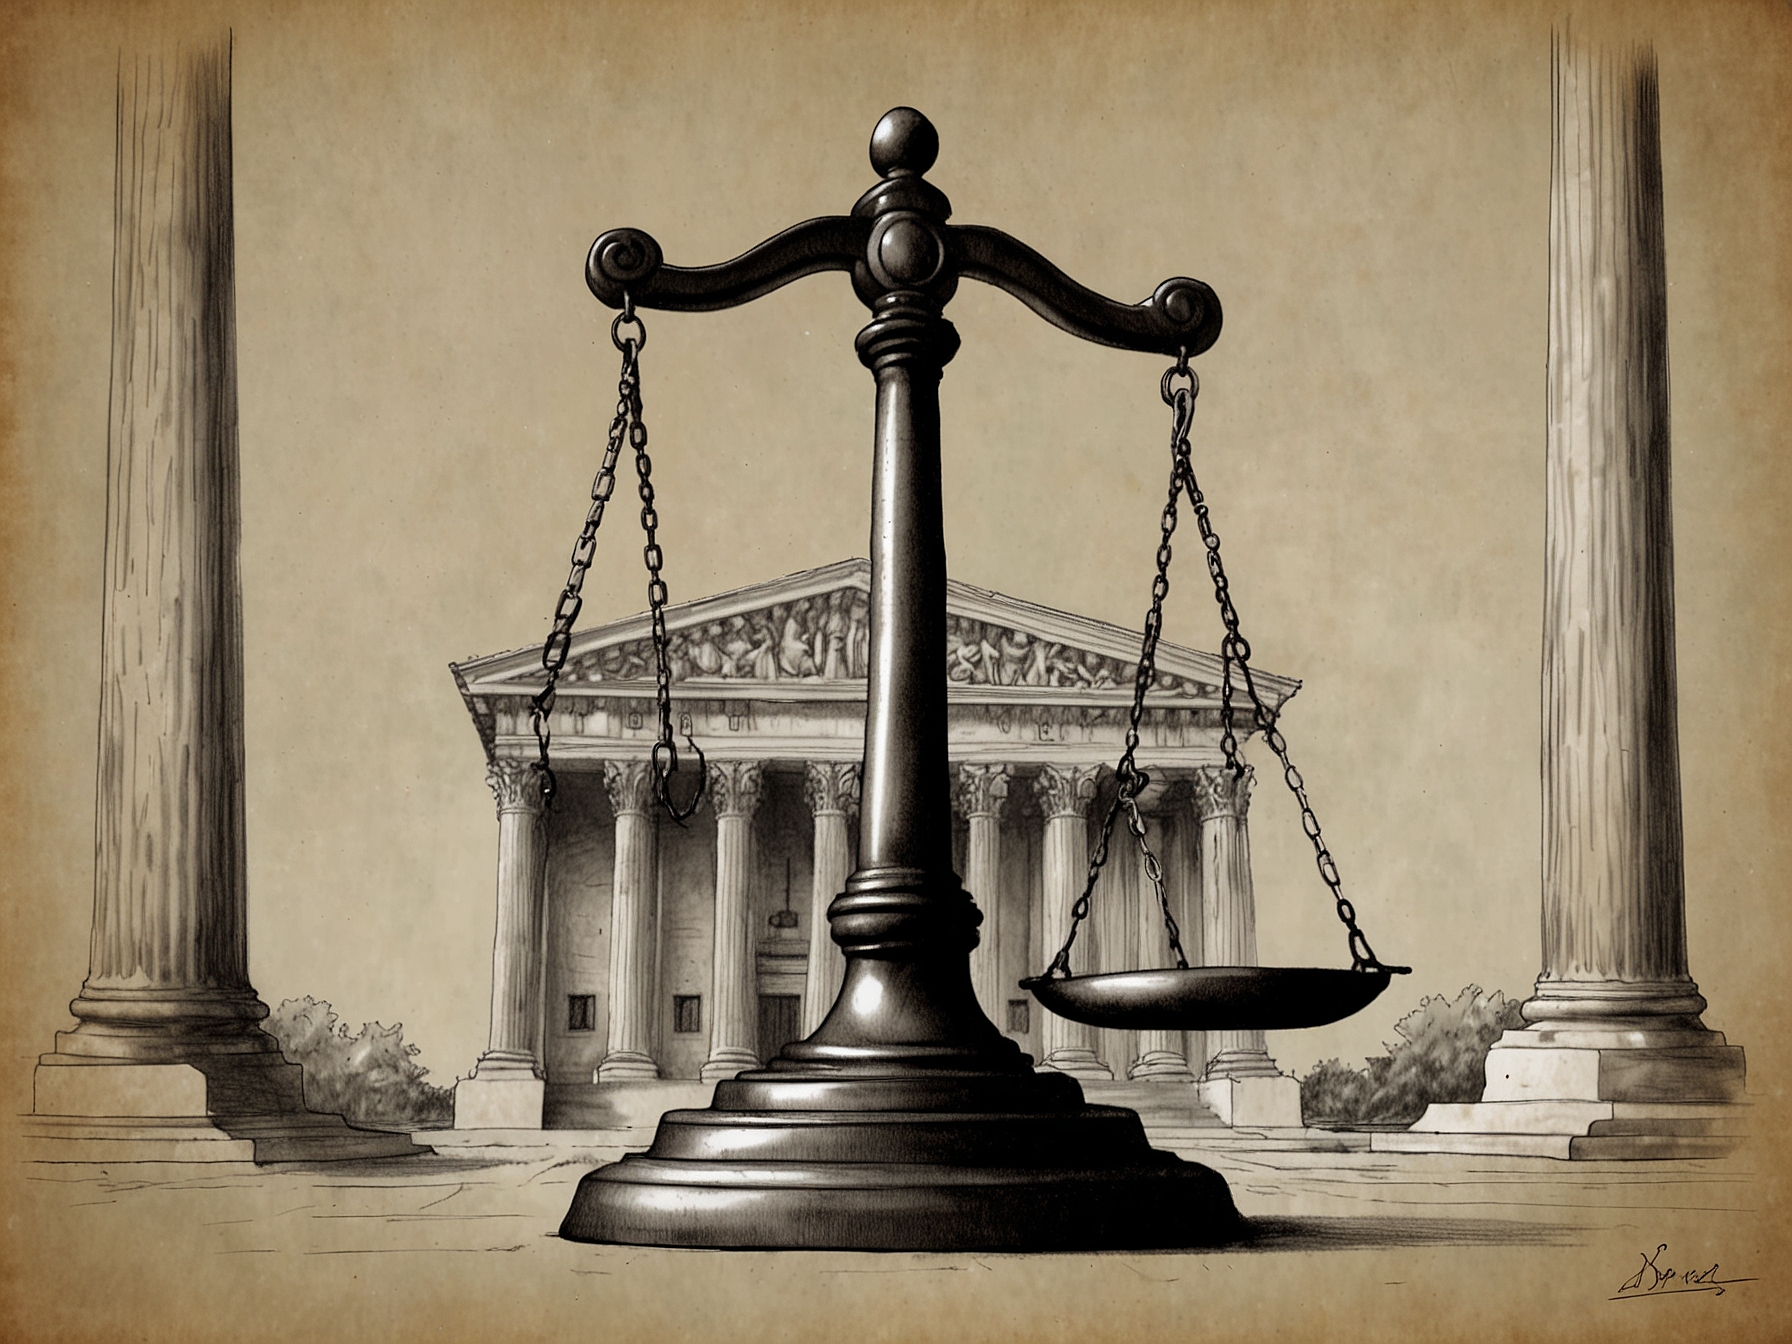 A symbolic illustration of a scale tipped in favor of executive power, representing the Supreme Court's ruling and its implications for checks and balances in the U.S. government.